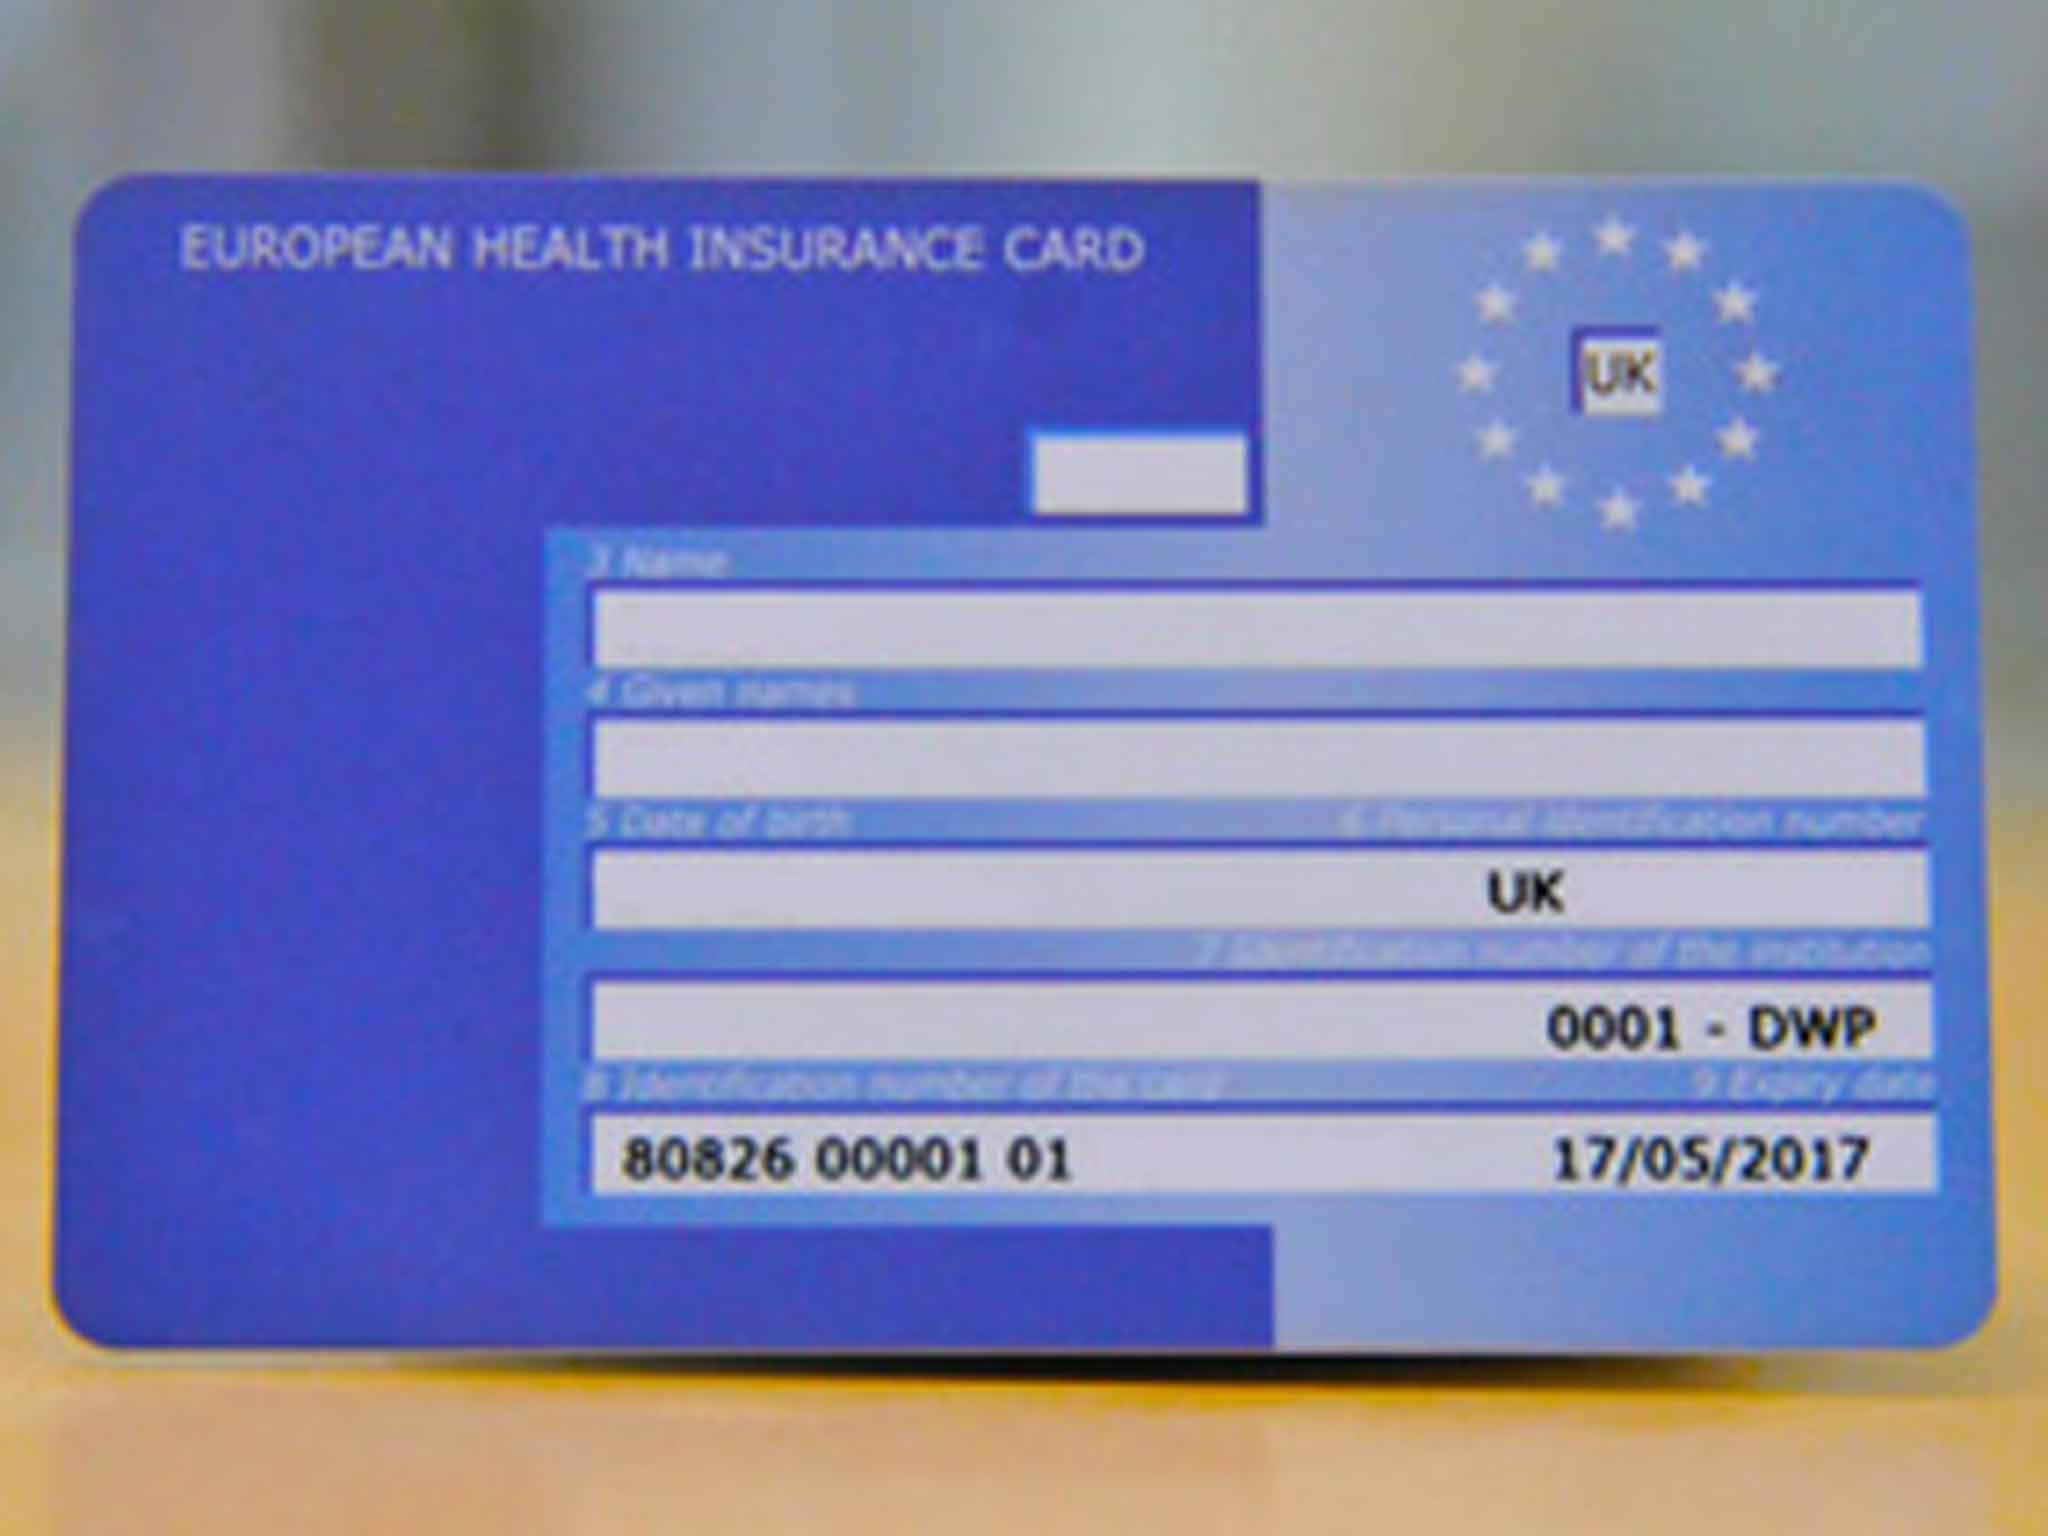 What Are Some Important Facts To Know About EHIC?